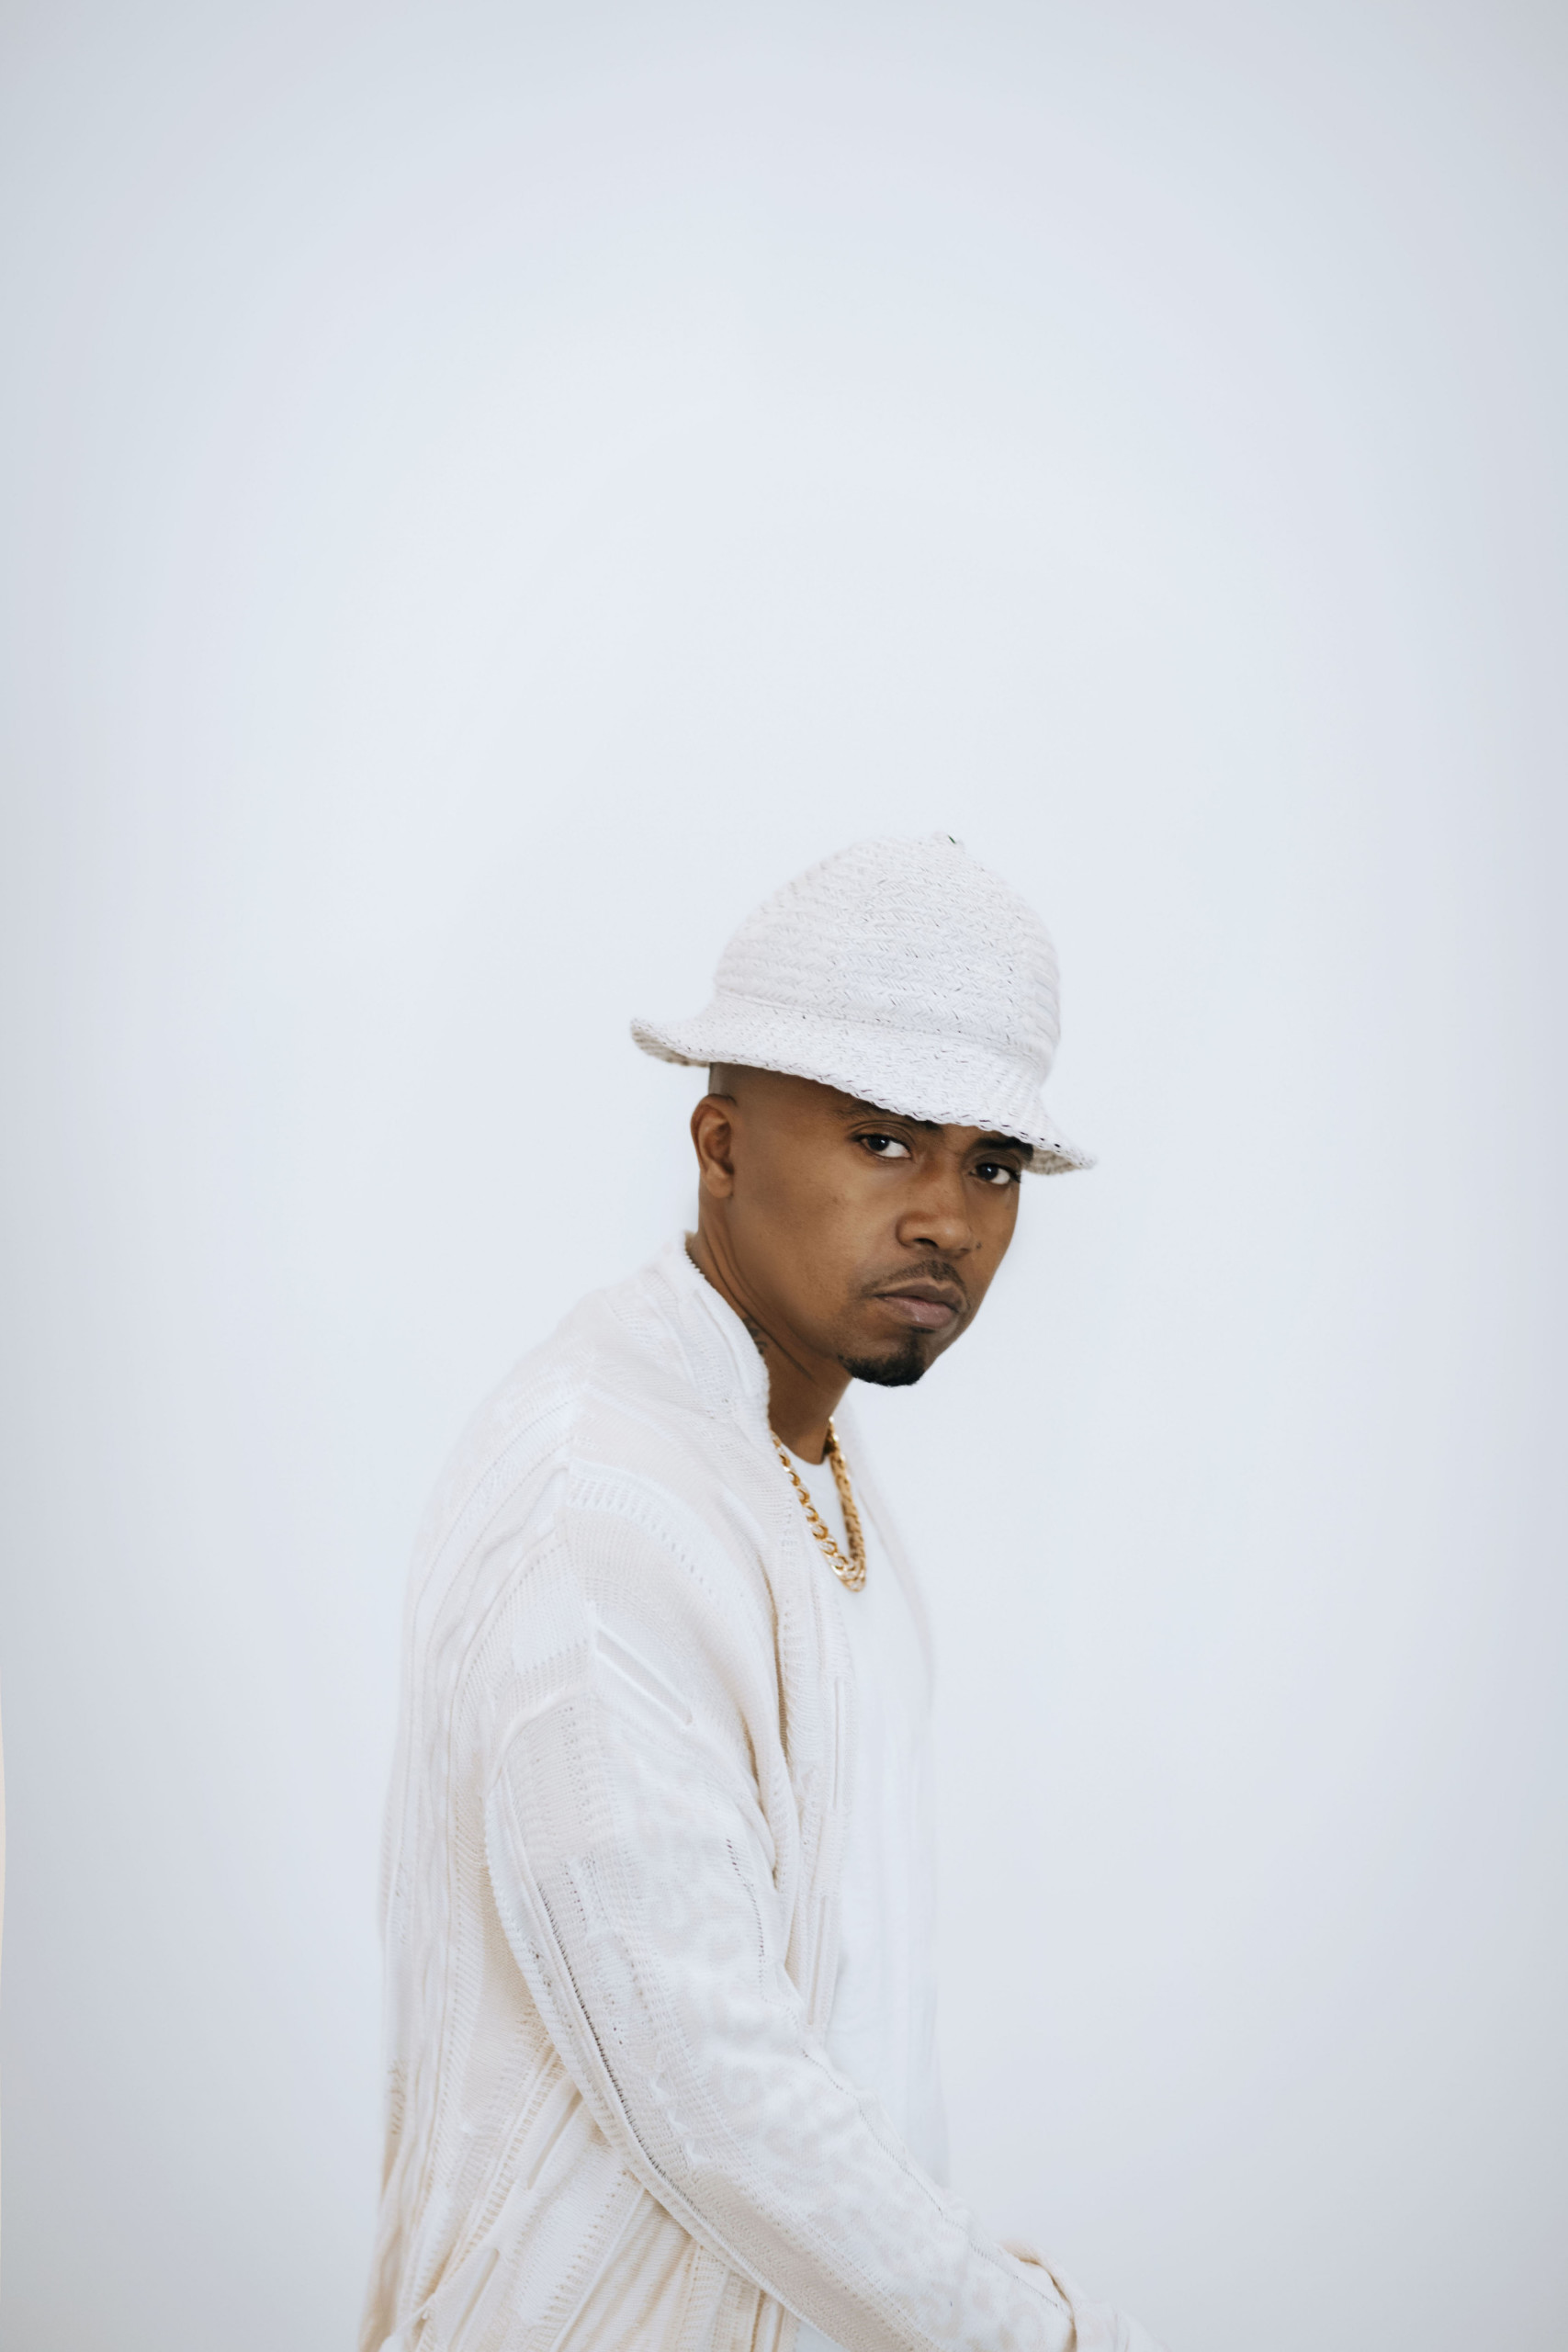 Musician in white cap and jacket against white background